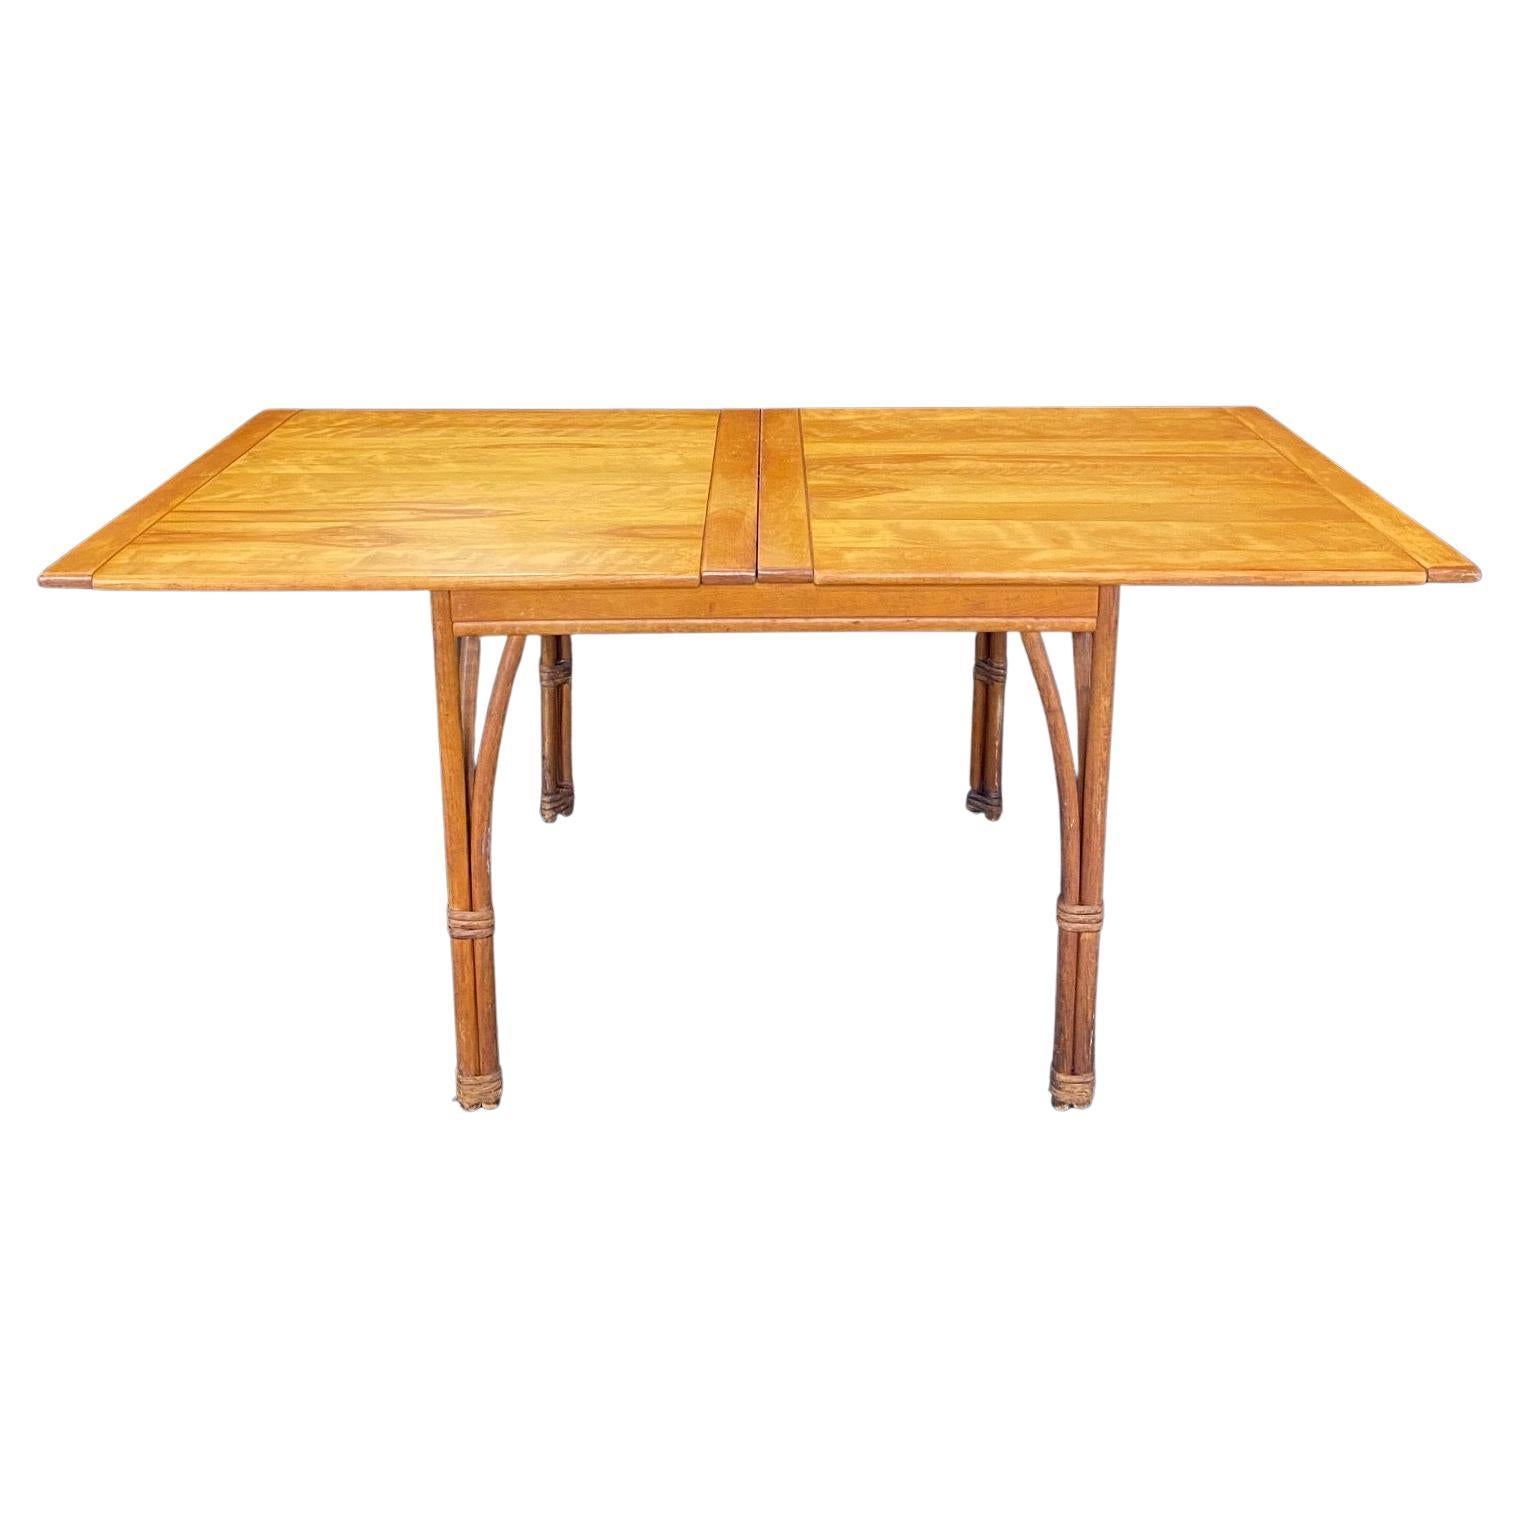 Heywood Wakefield Ashcraft Hollywood Regency Faux Bamboo Expandable Dining Table